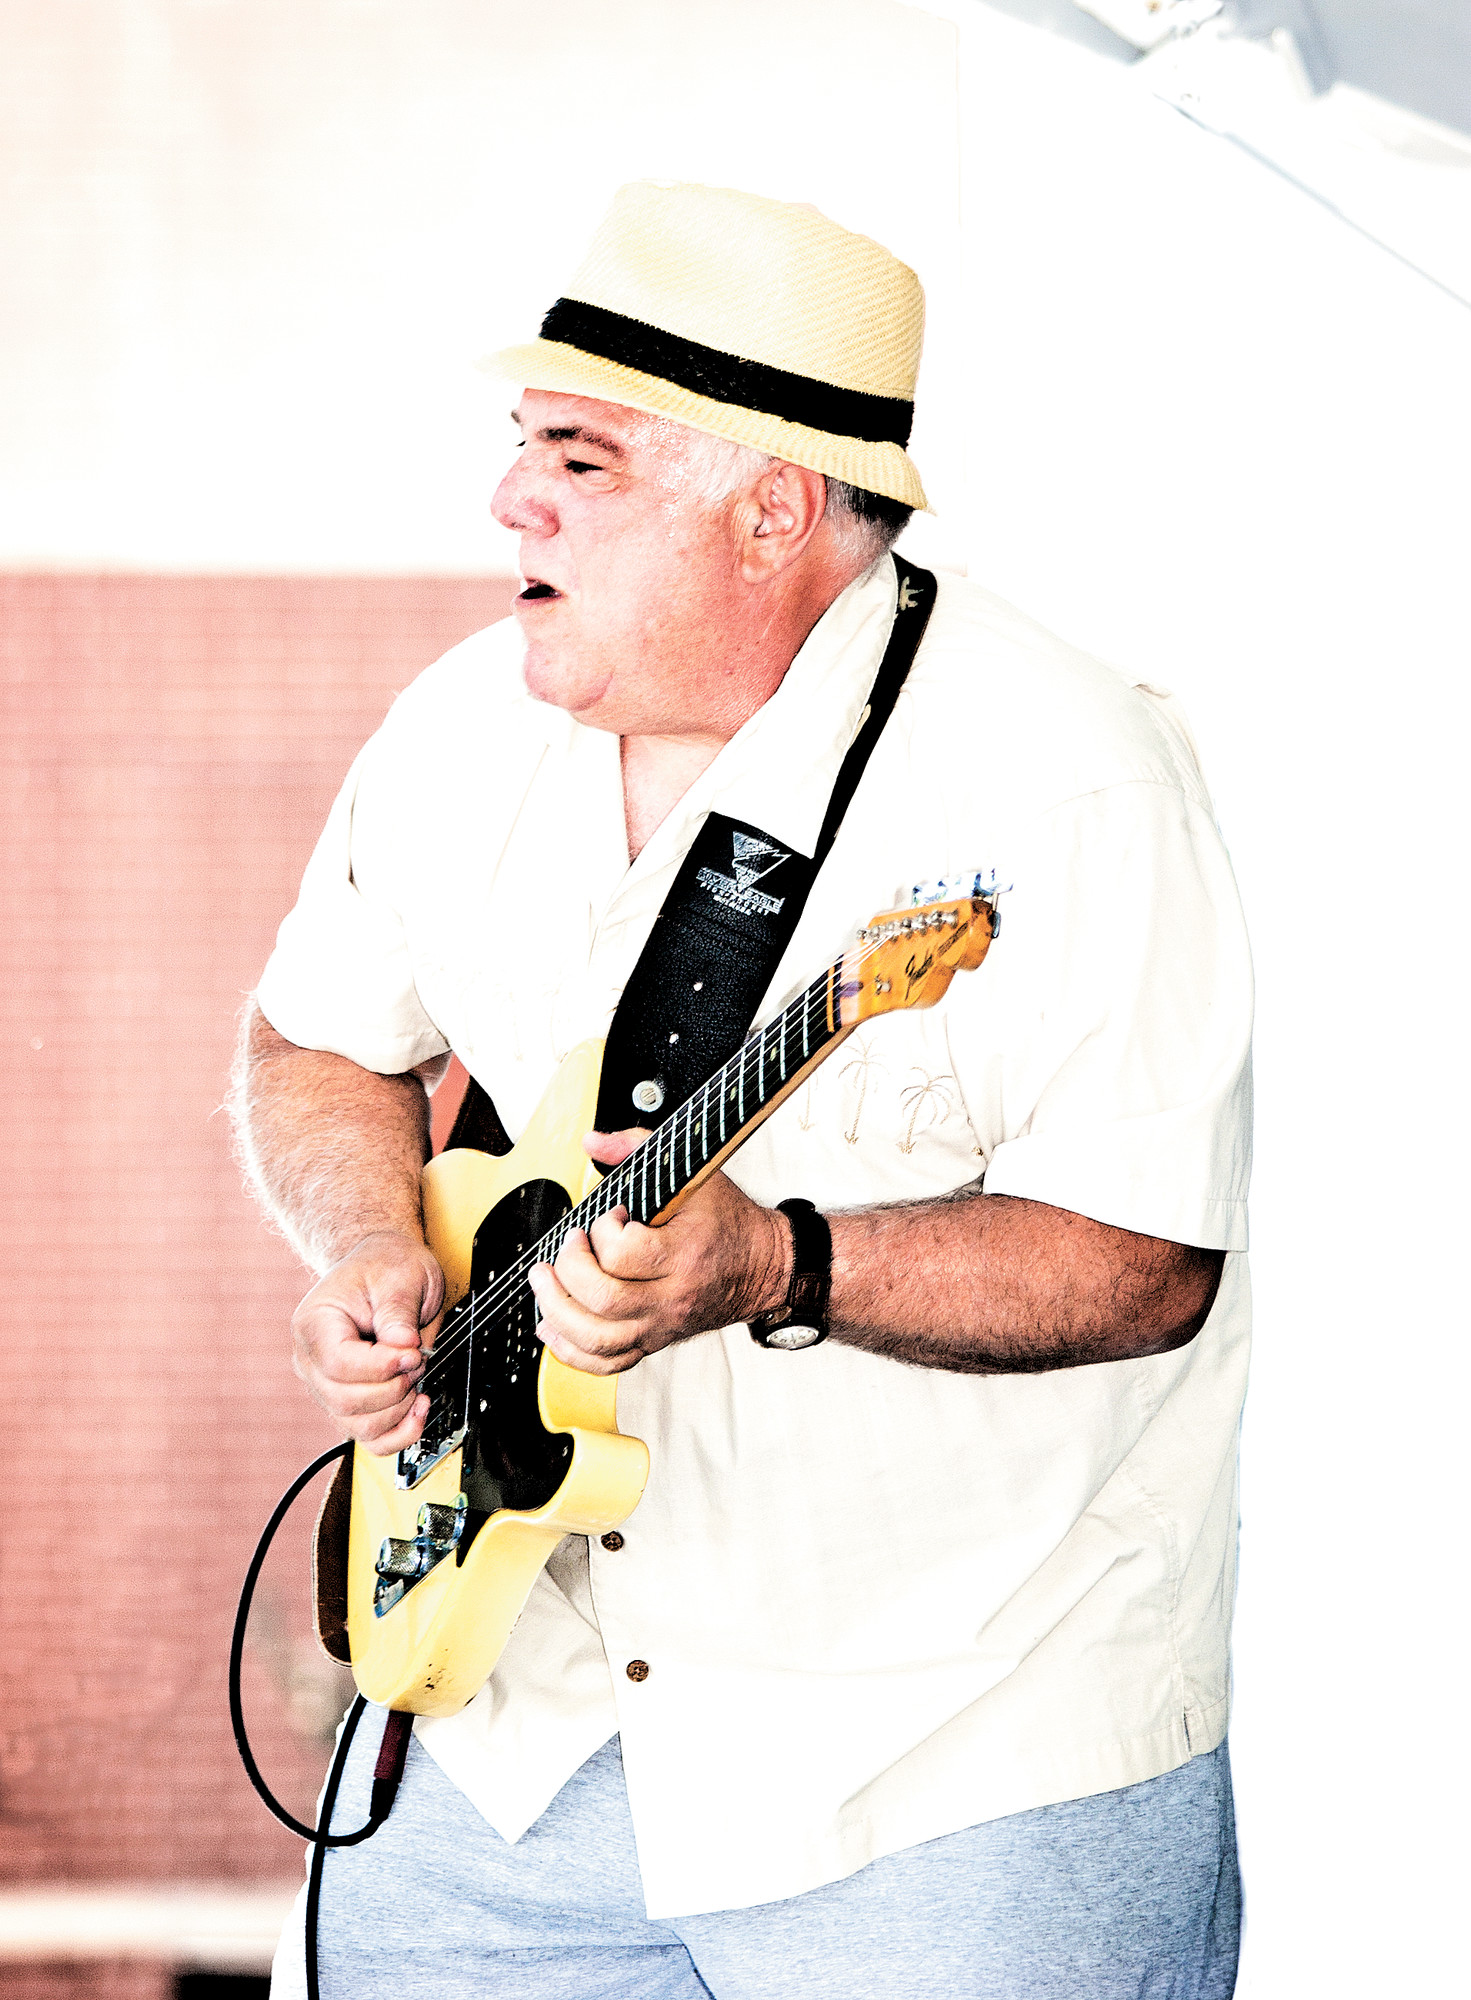 Guitarist Mike Barnett, of J. Brittany and the Bad Boys, rocked the crowed at last year’s festival.